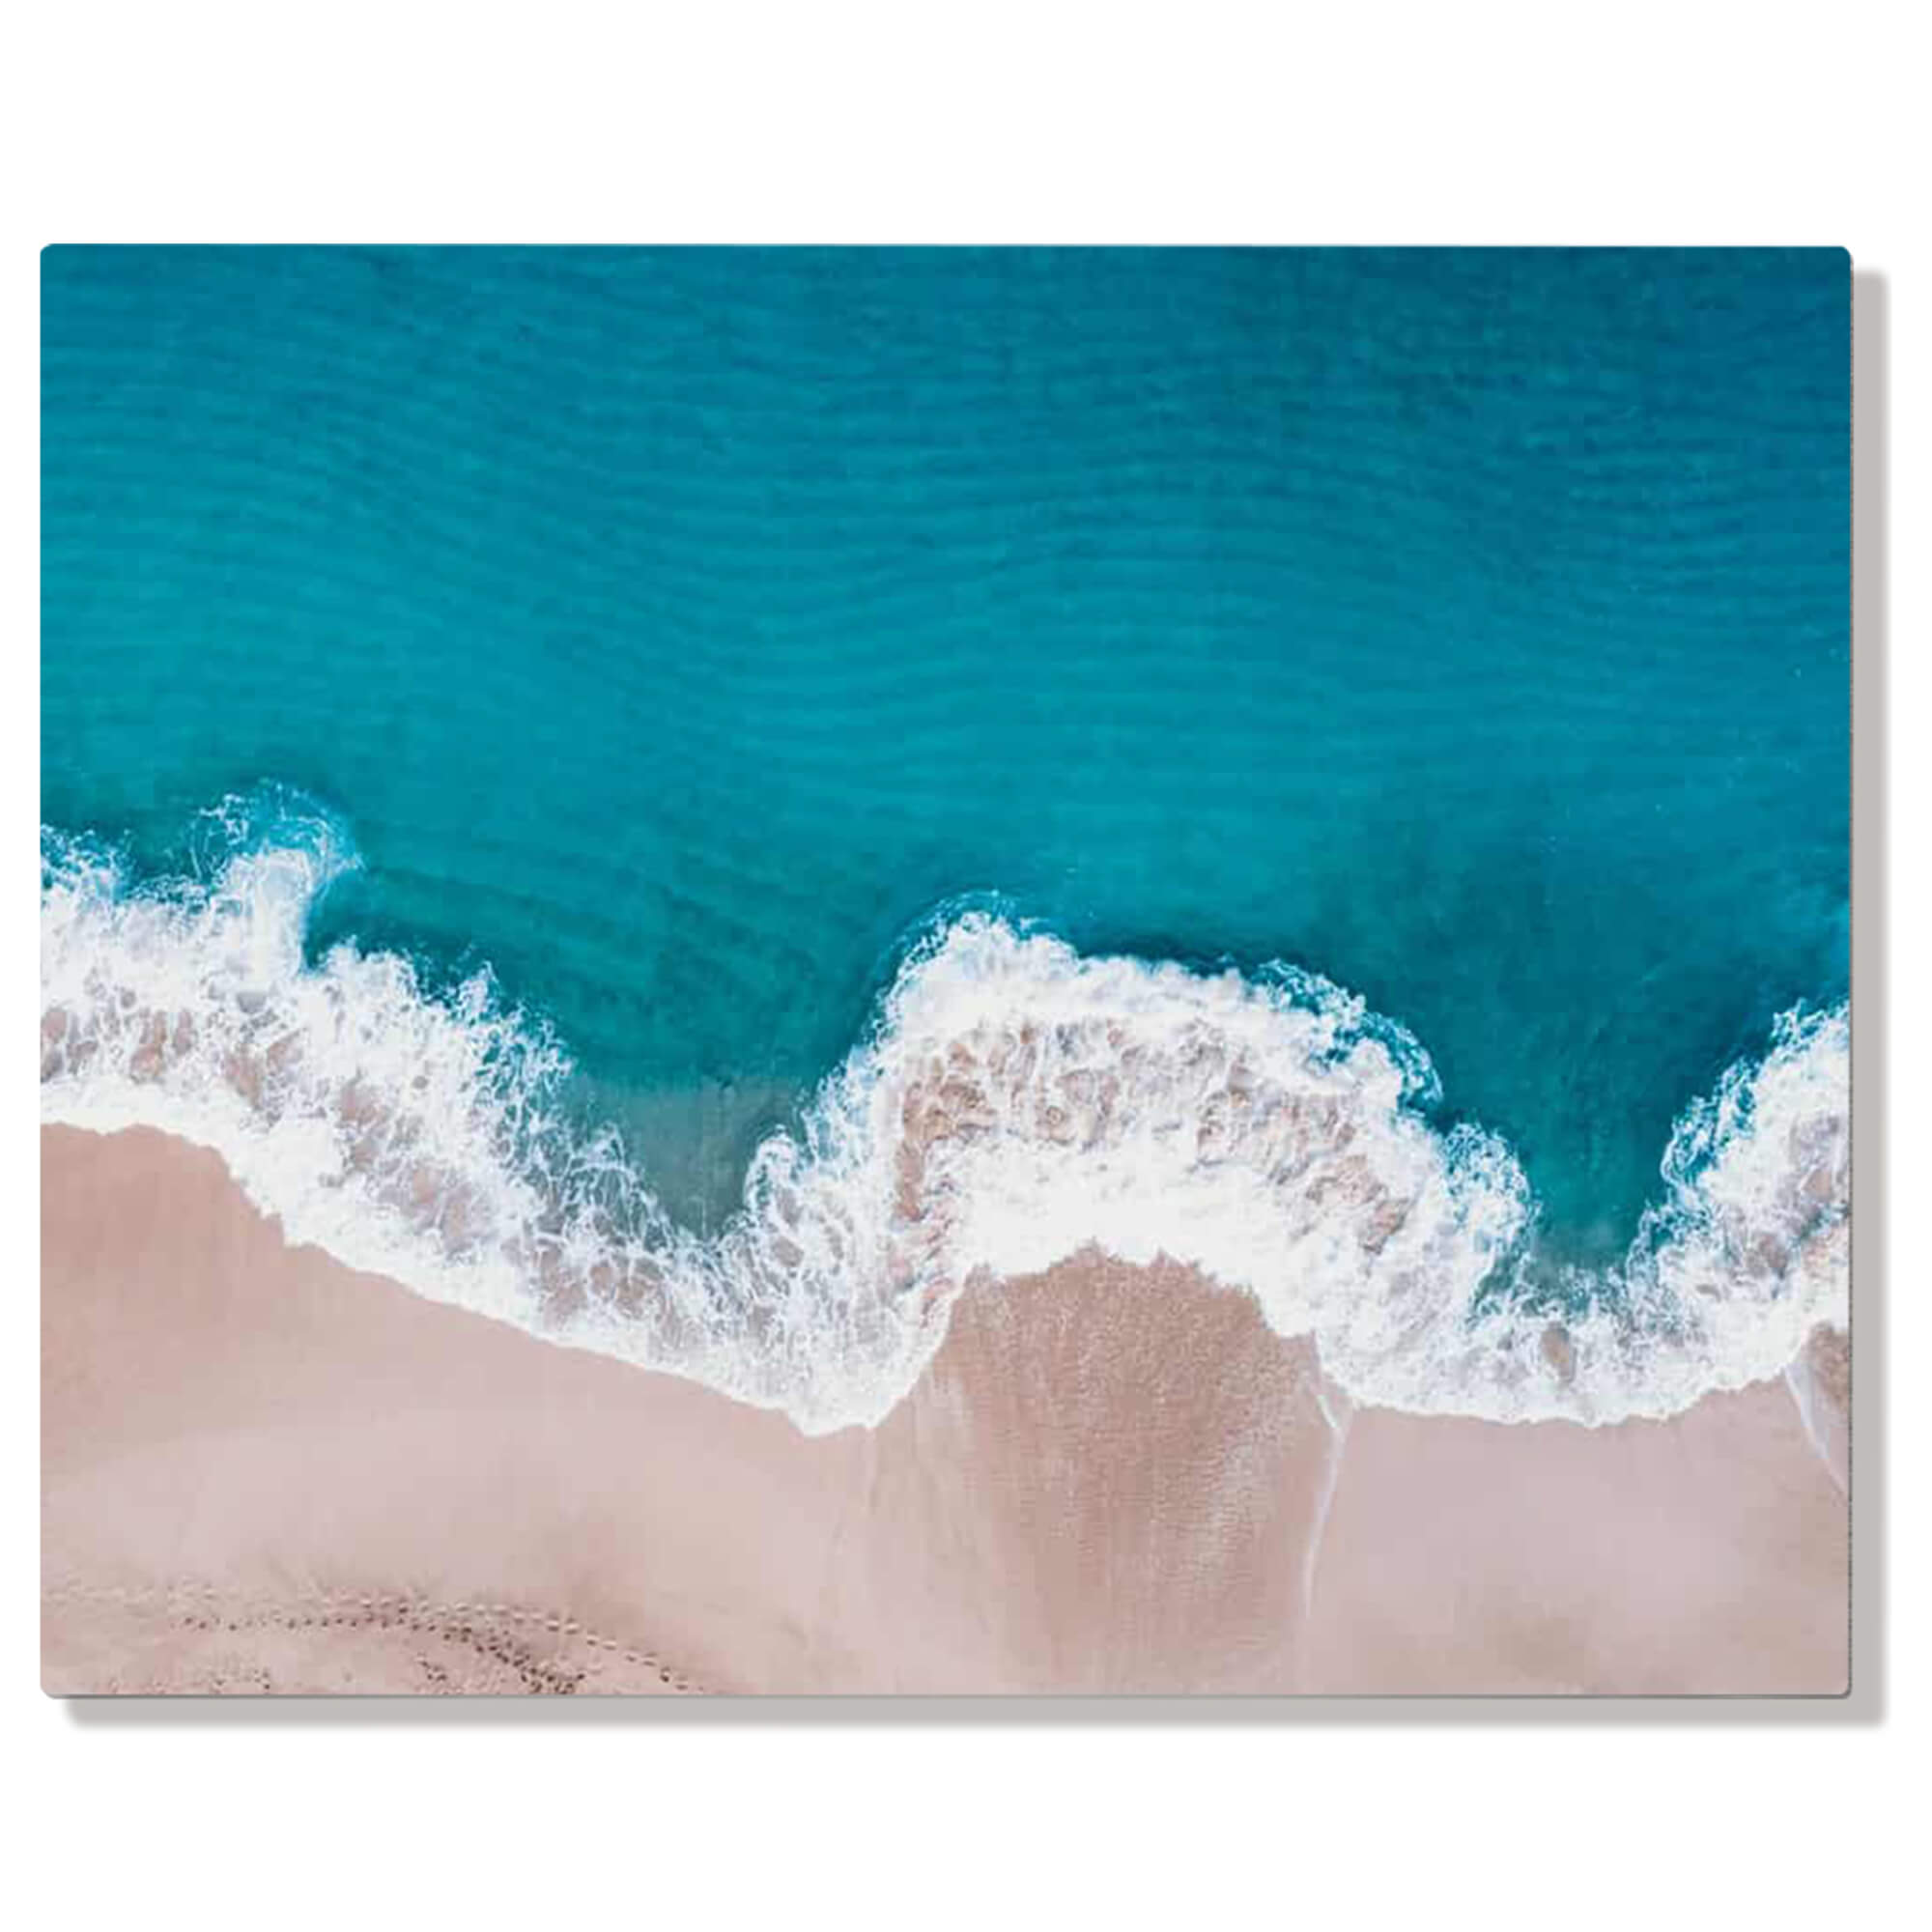 A metal art print of a peaceful seascape drone photo by Hawaii artist Bree Poort